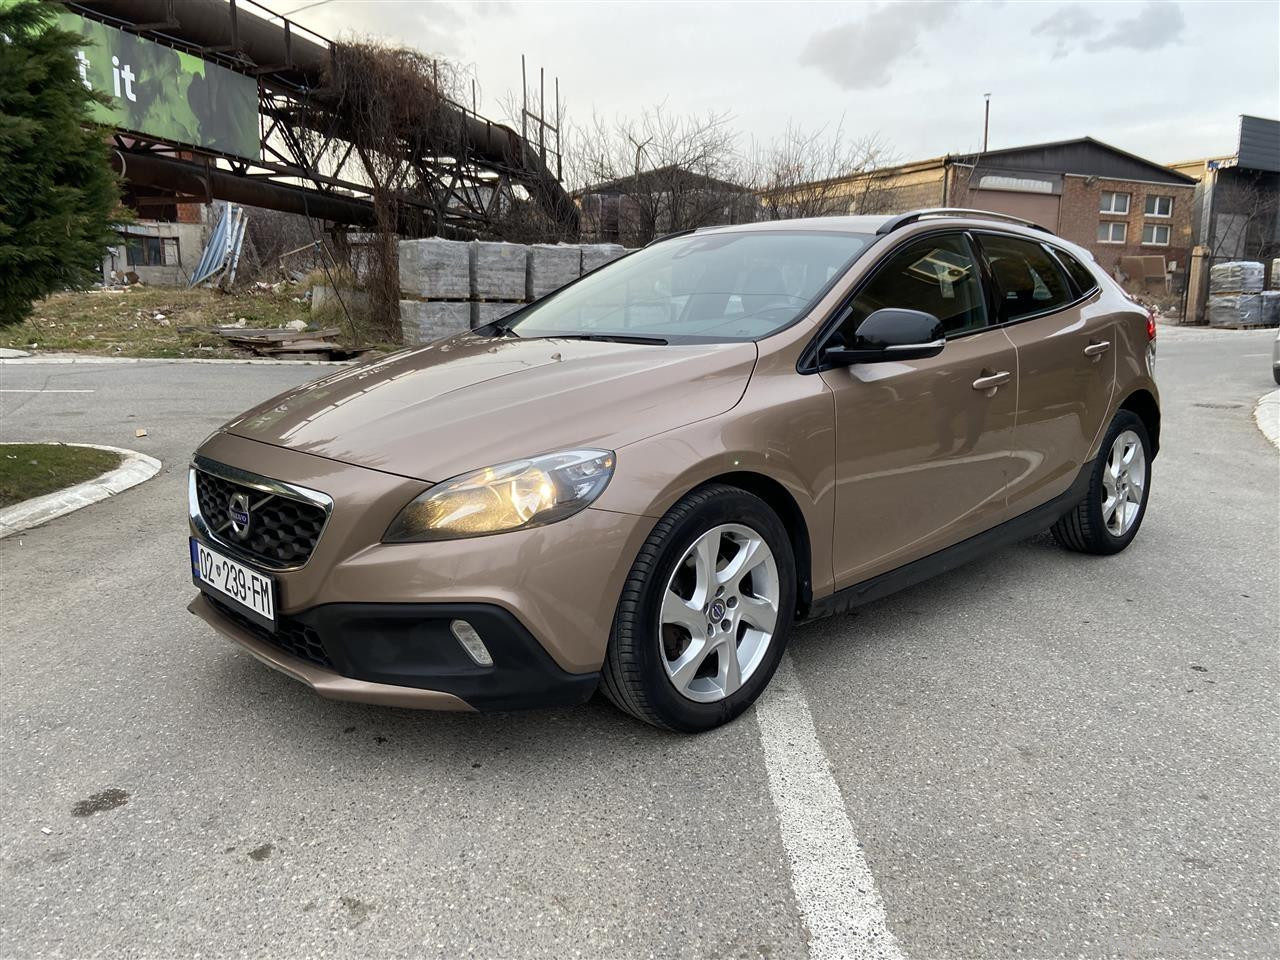 Volvo v40 Cross Country 1.6 disel 84 KW-114 PS 